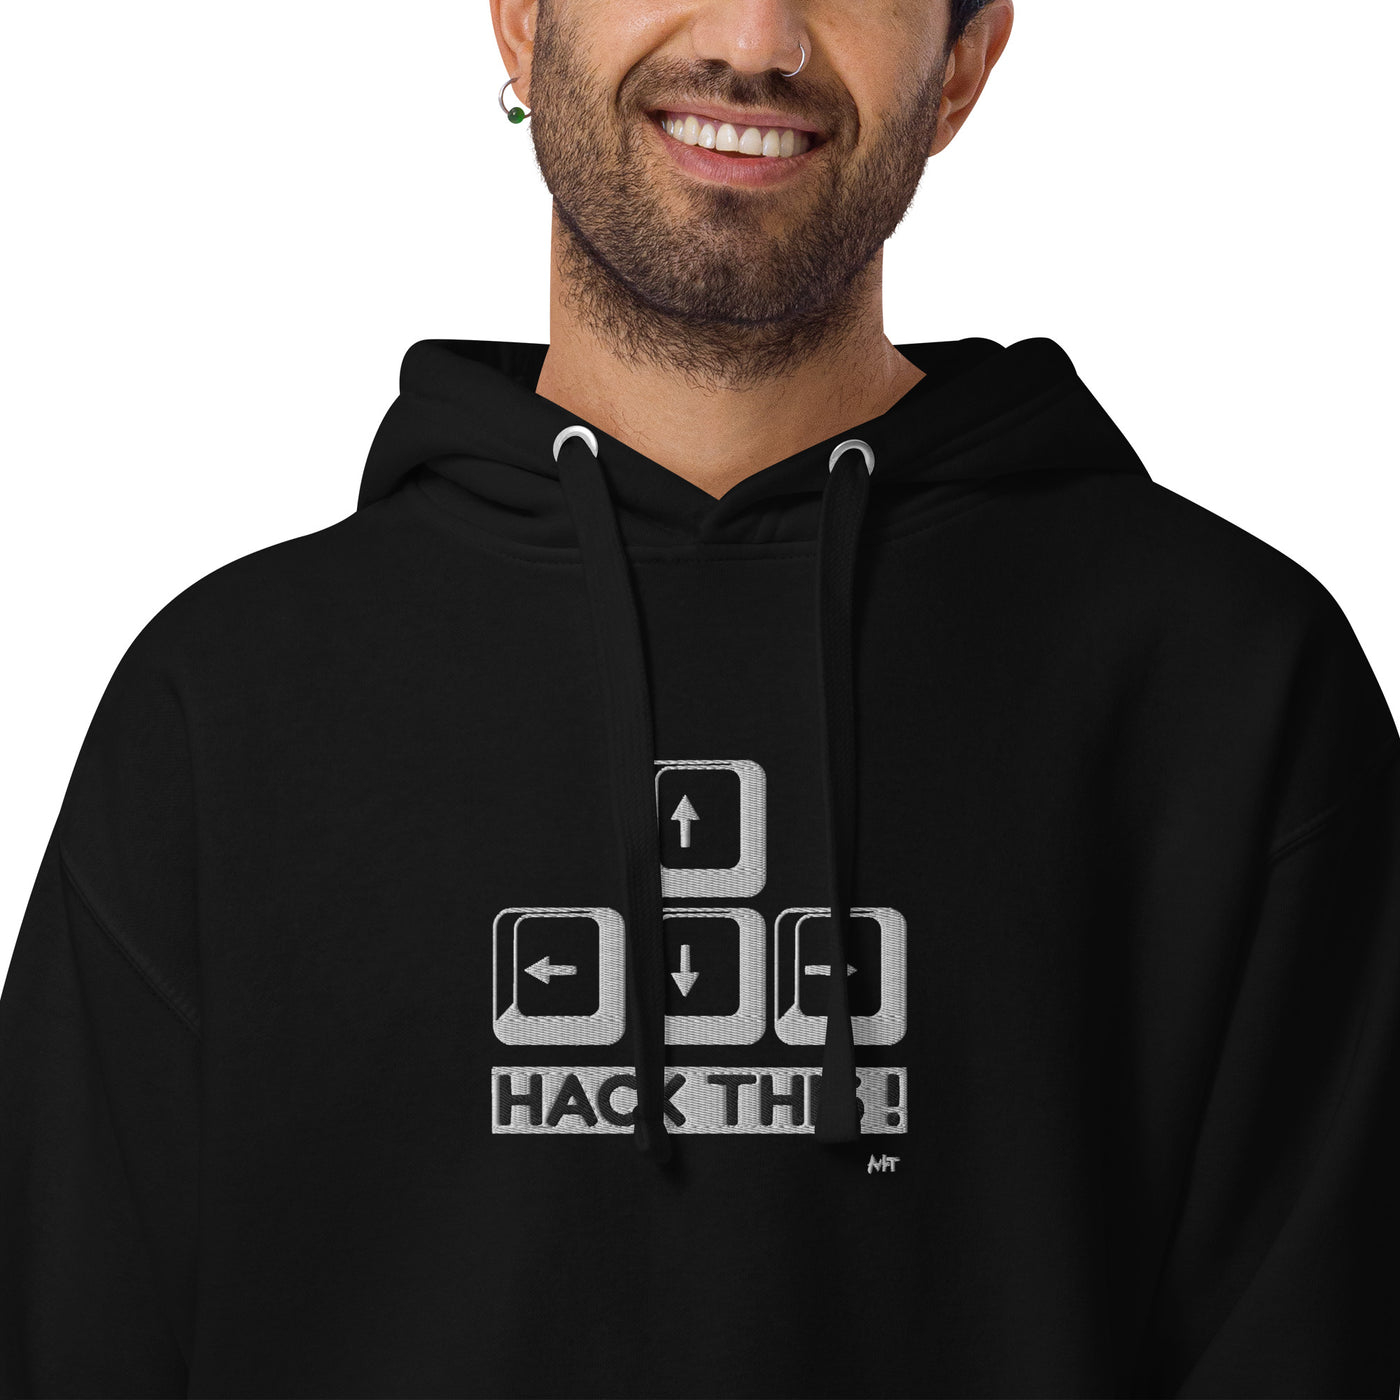 Hack this - Unisex Hoodie (embroidered)